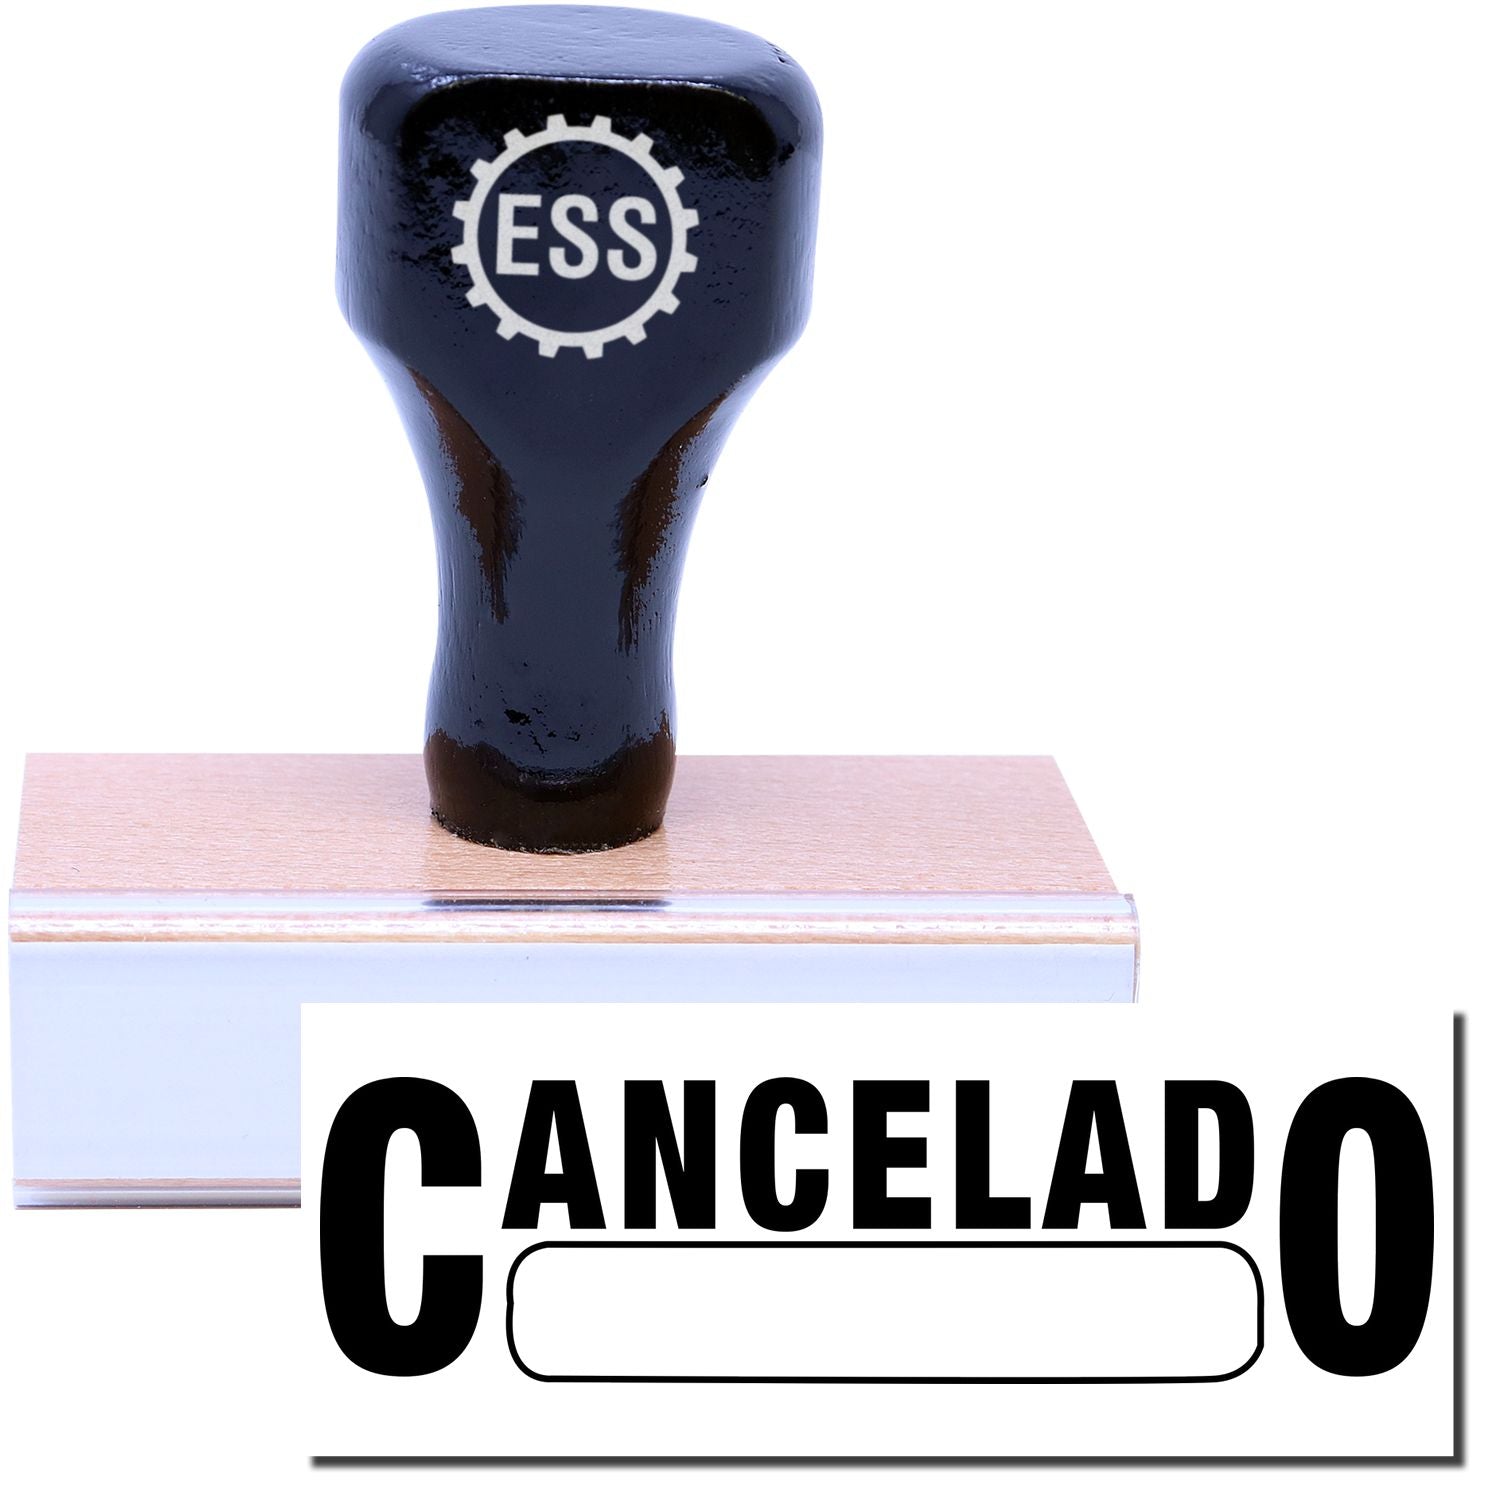 A stock office rubber stamp with a stamped image showing how the text "CANCELADO" with a box is displayed after stamping.